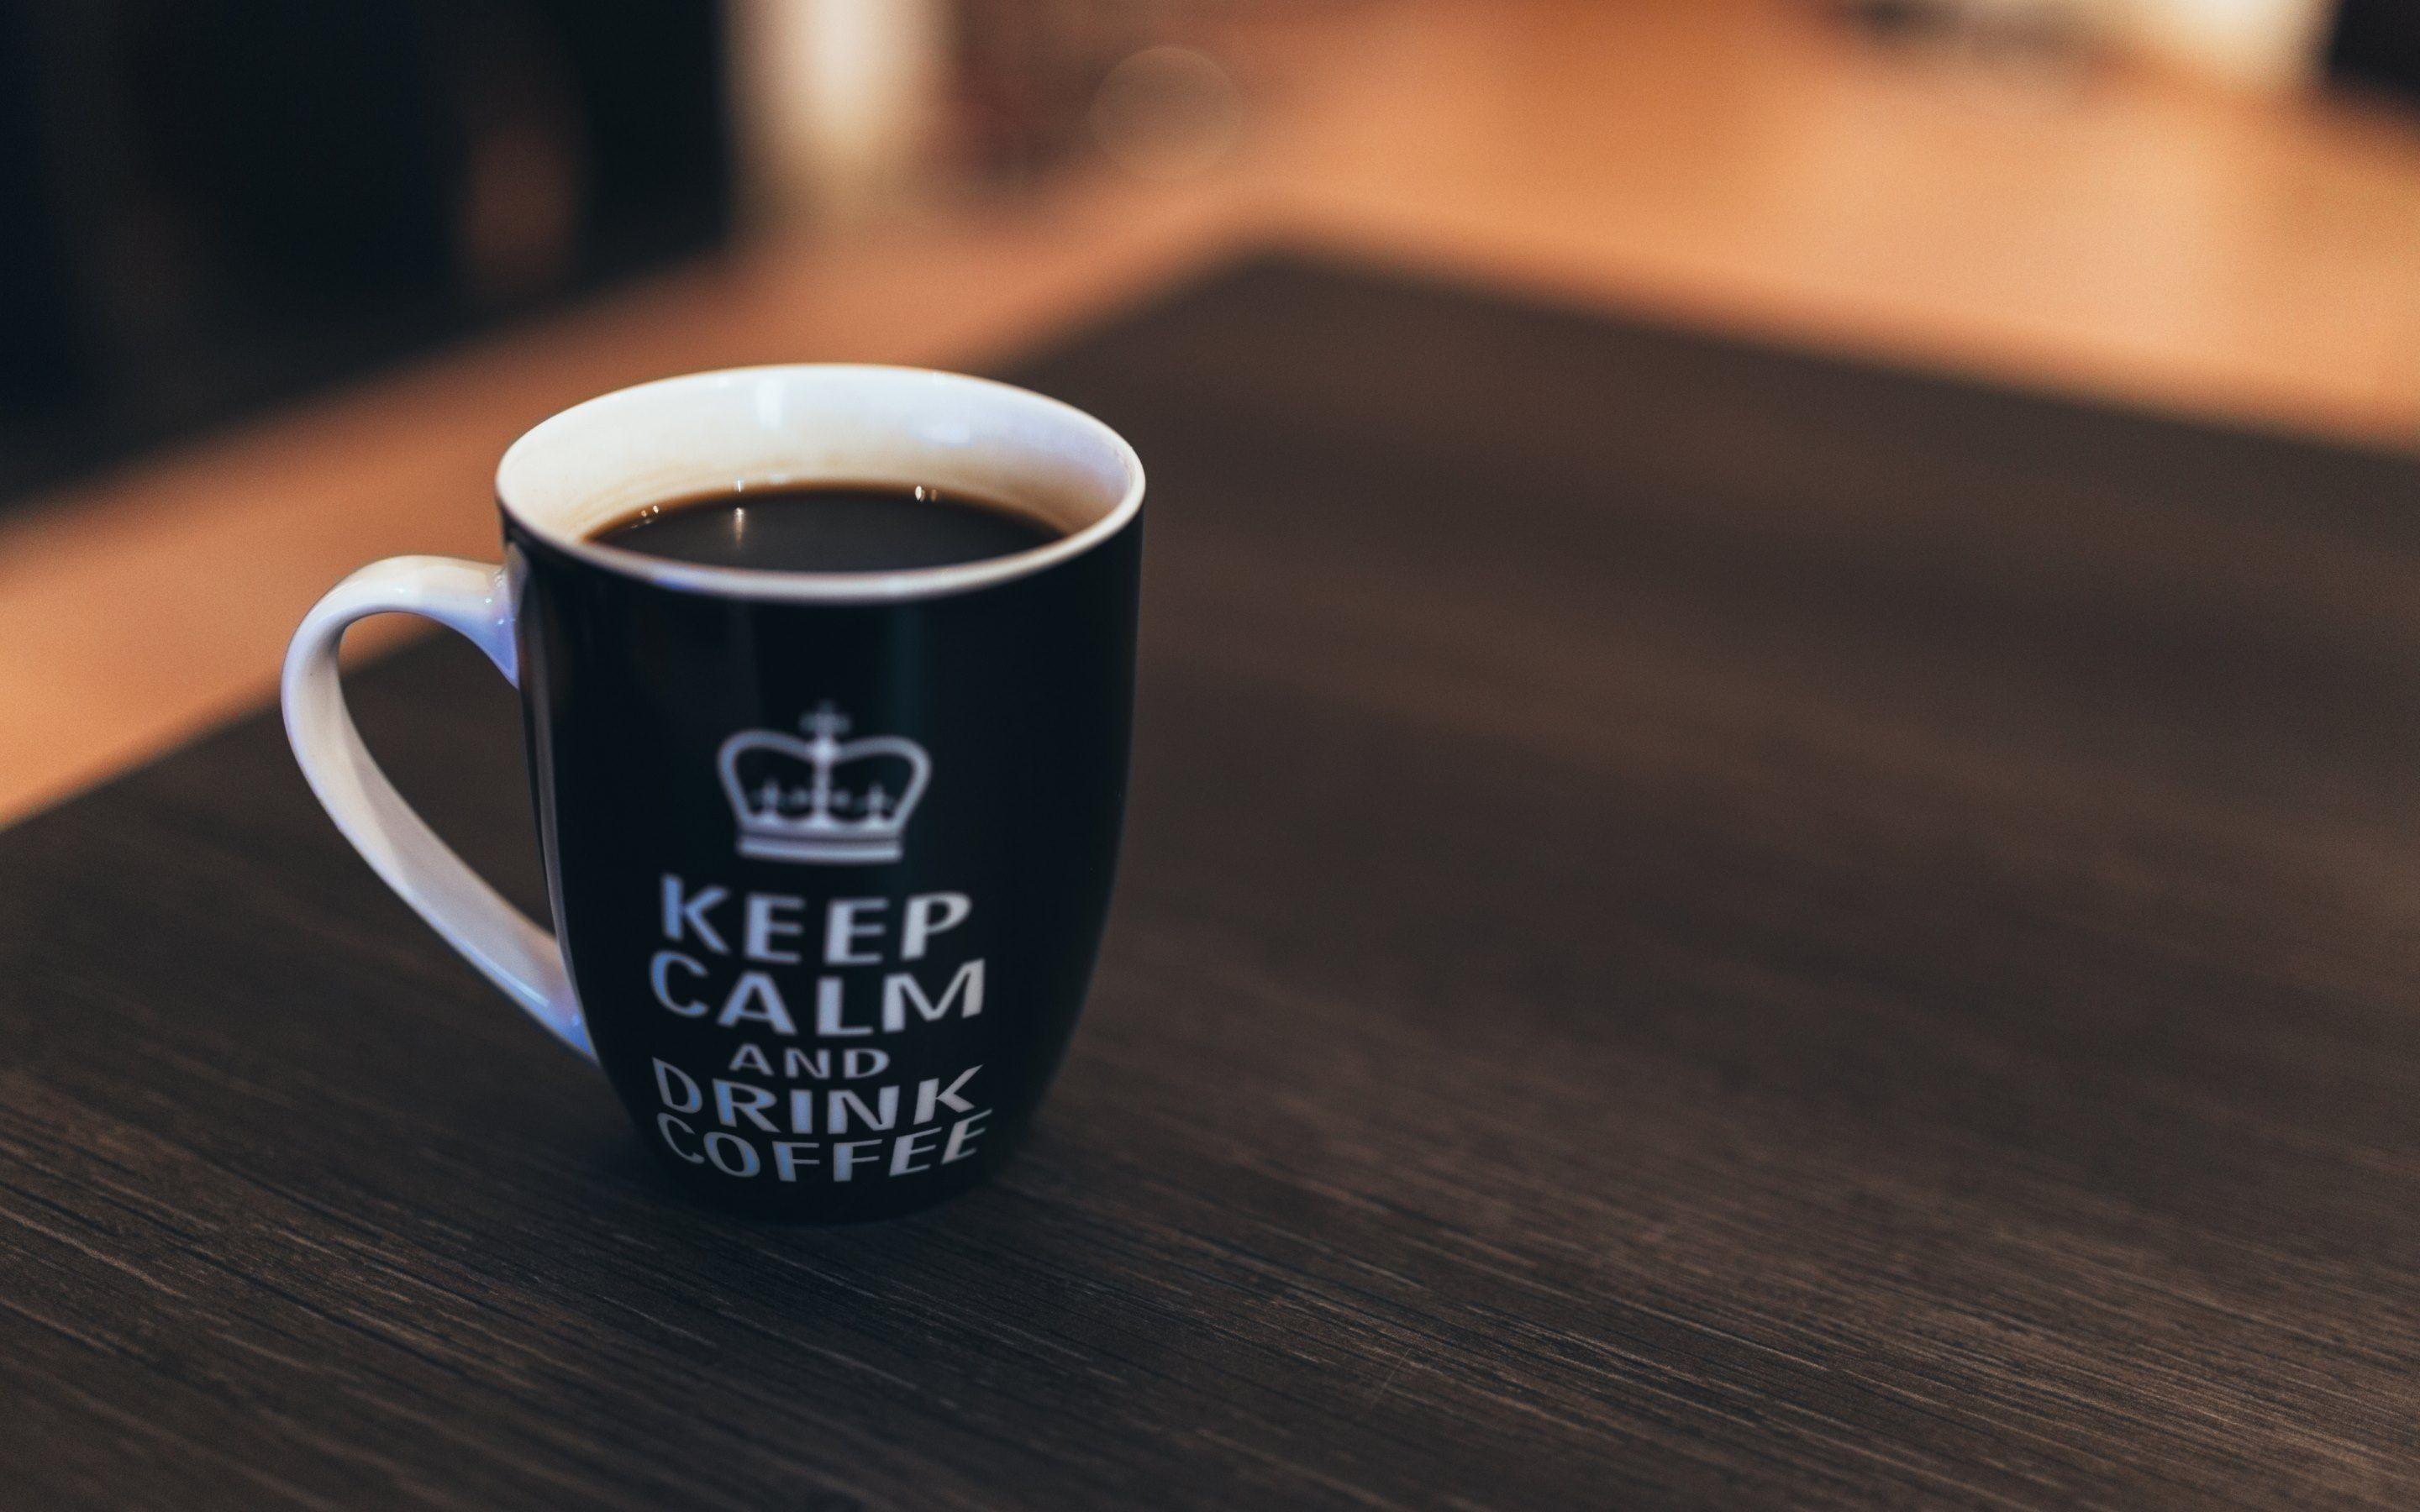 Keep Calm and Drink Coffee Cup Wallpaper 61871 2880x1800px